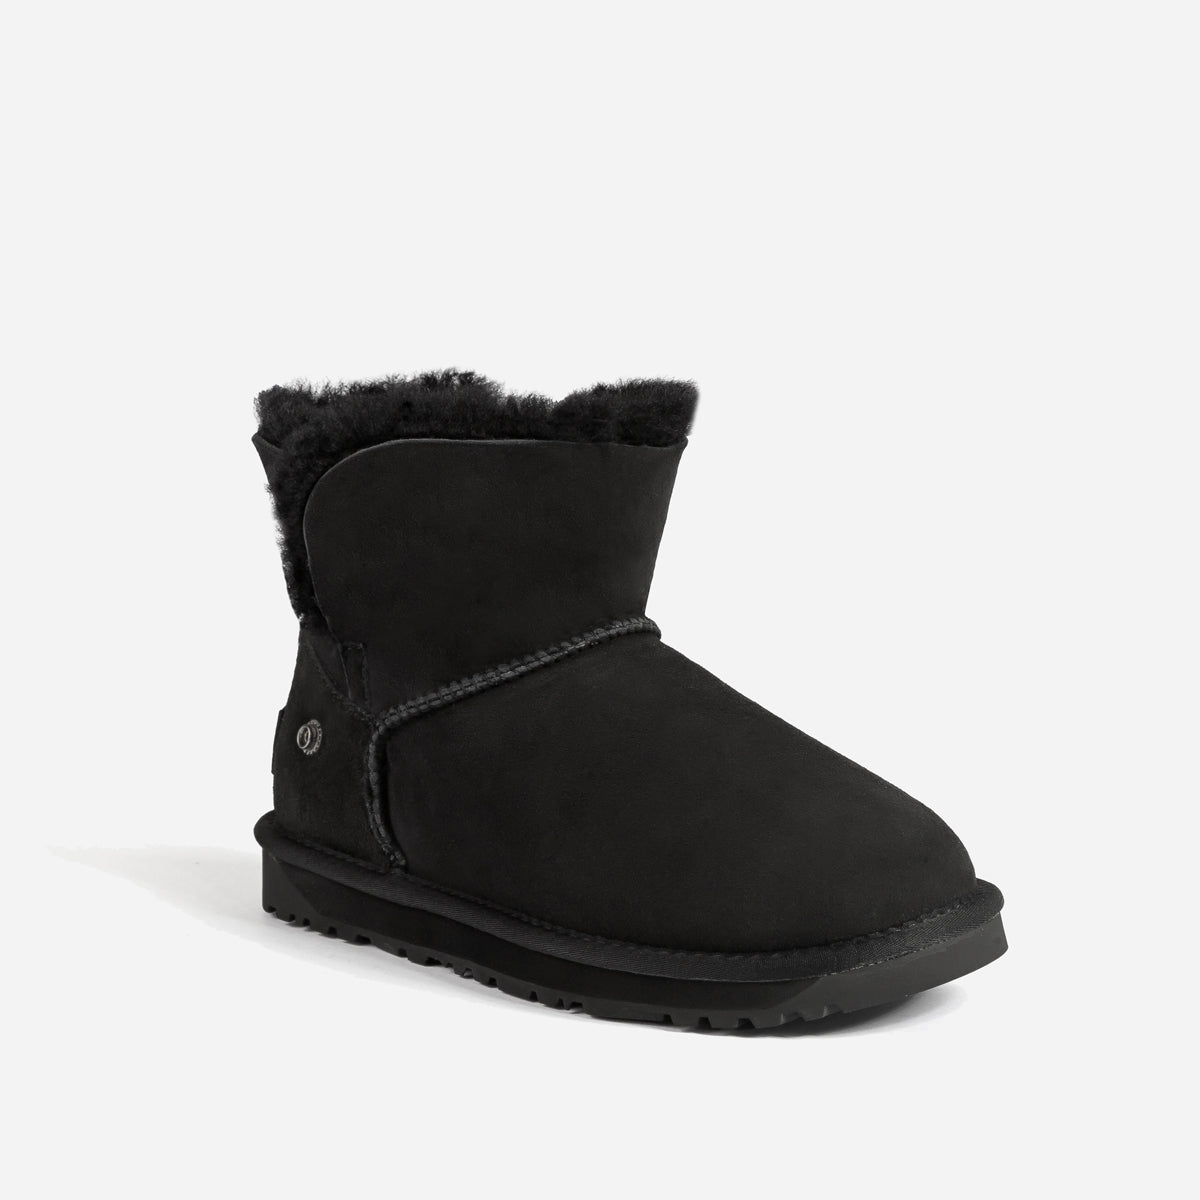 Ugg Mini Boots (Water Resistant)